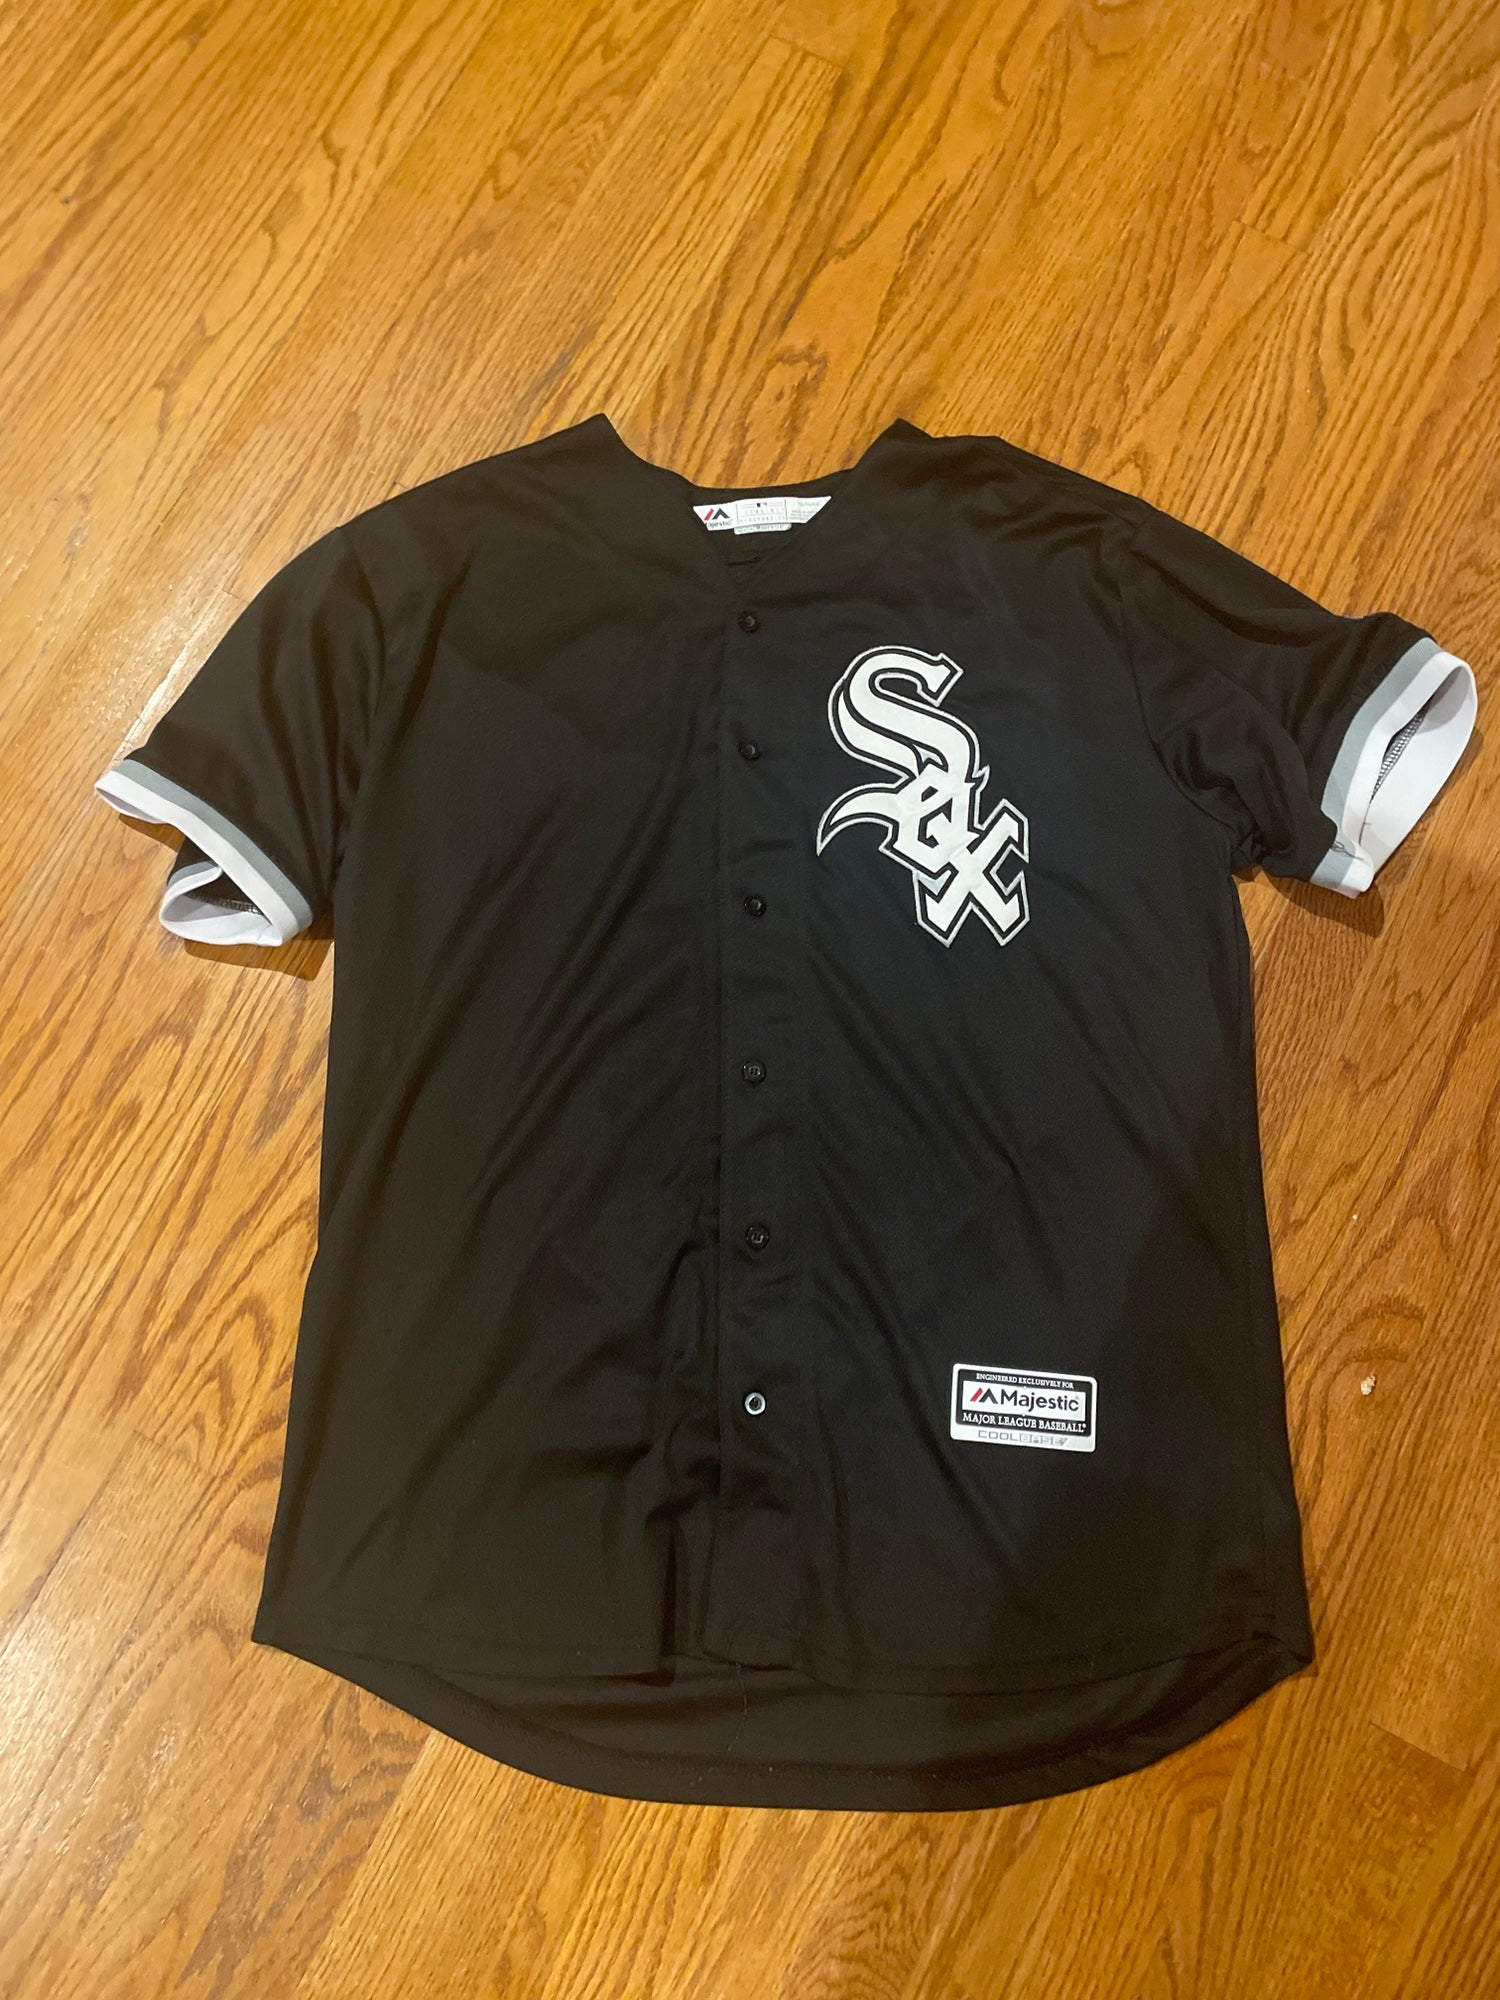 90s white sox jersey